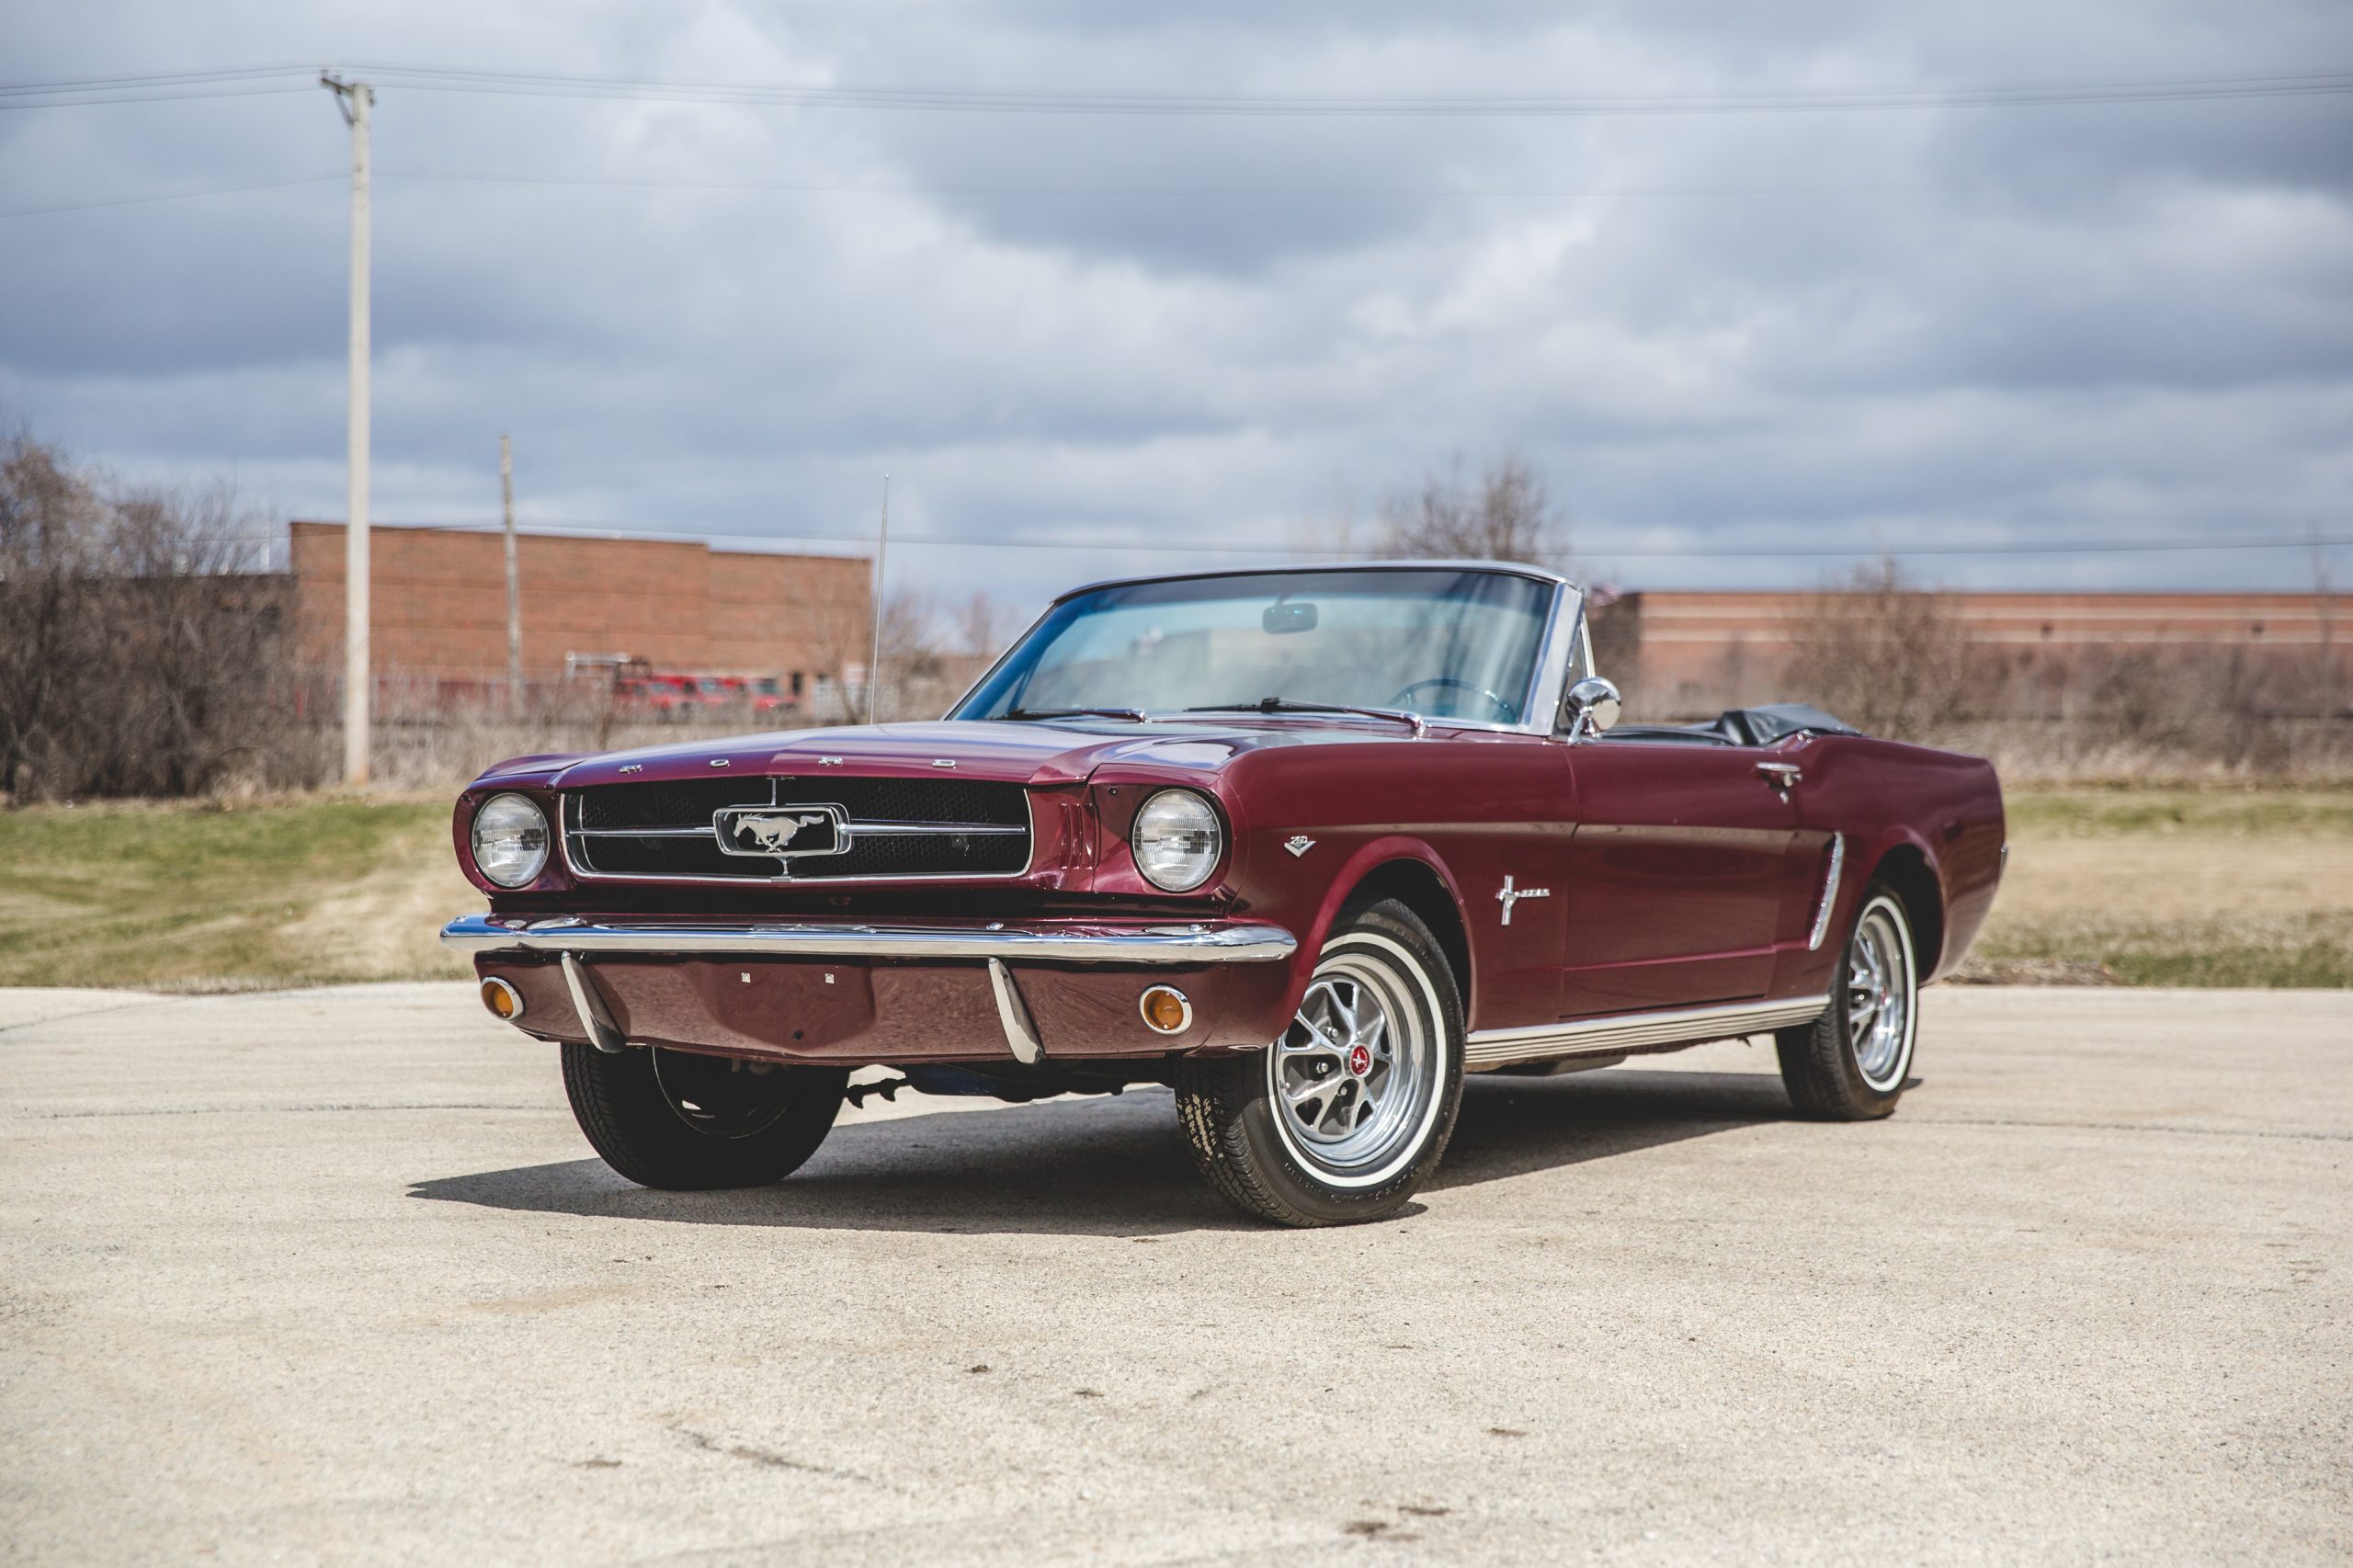 Mustang Of The Day: 1964½ Ford Mustang